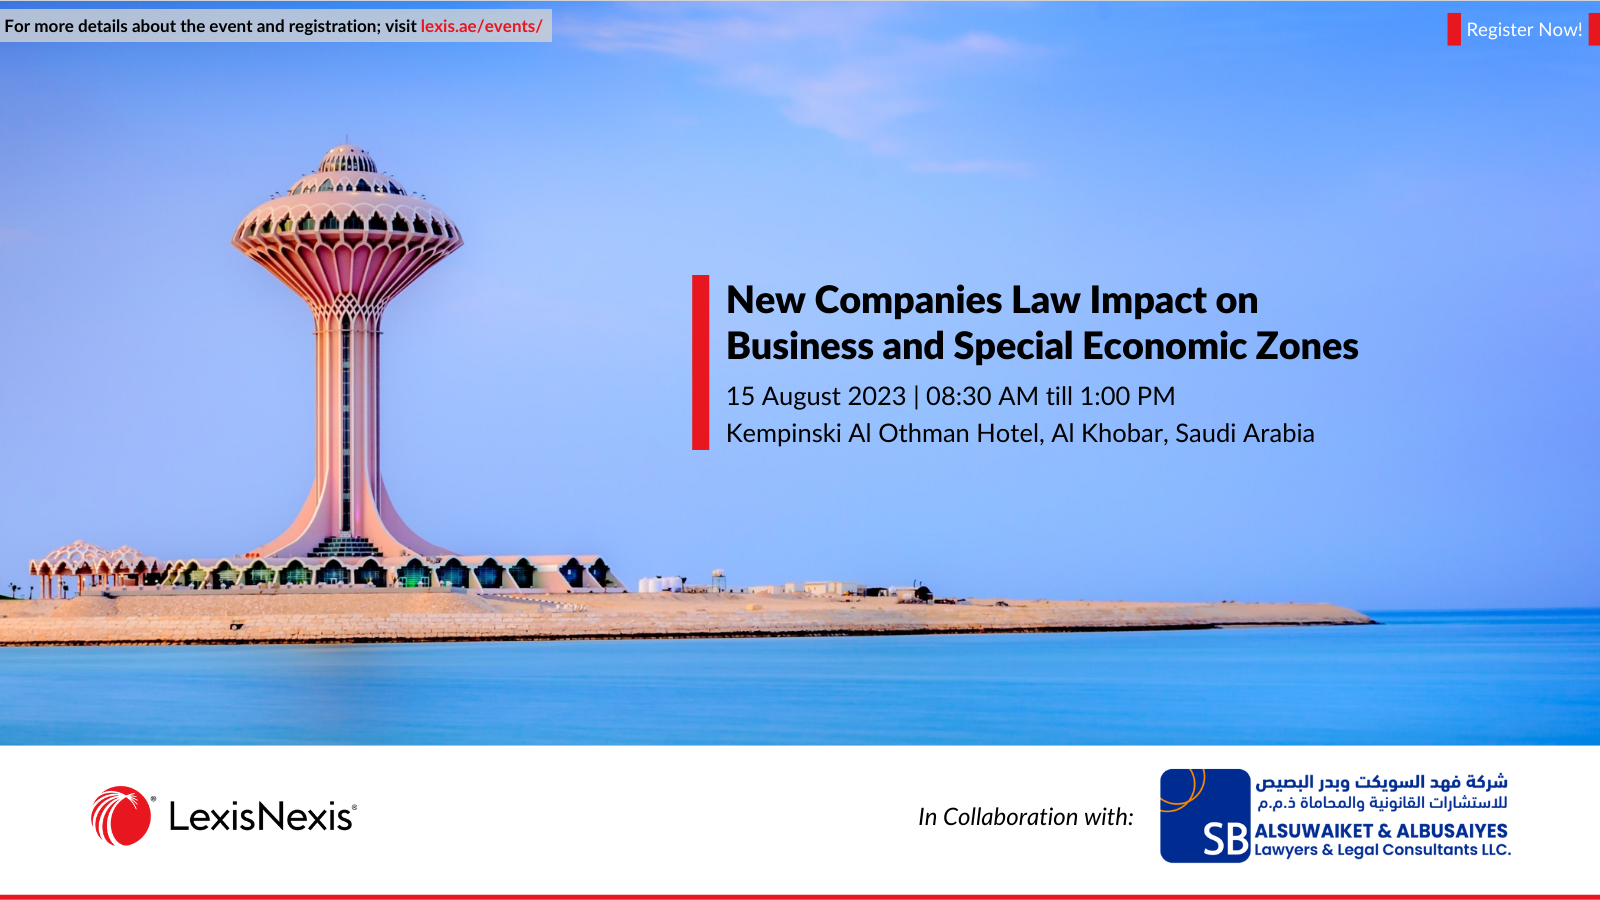 New Companies Law Impact on Business and Special Economic Zones | Eastern Province, Saudi Arabia | 15 August 2023